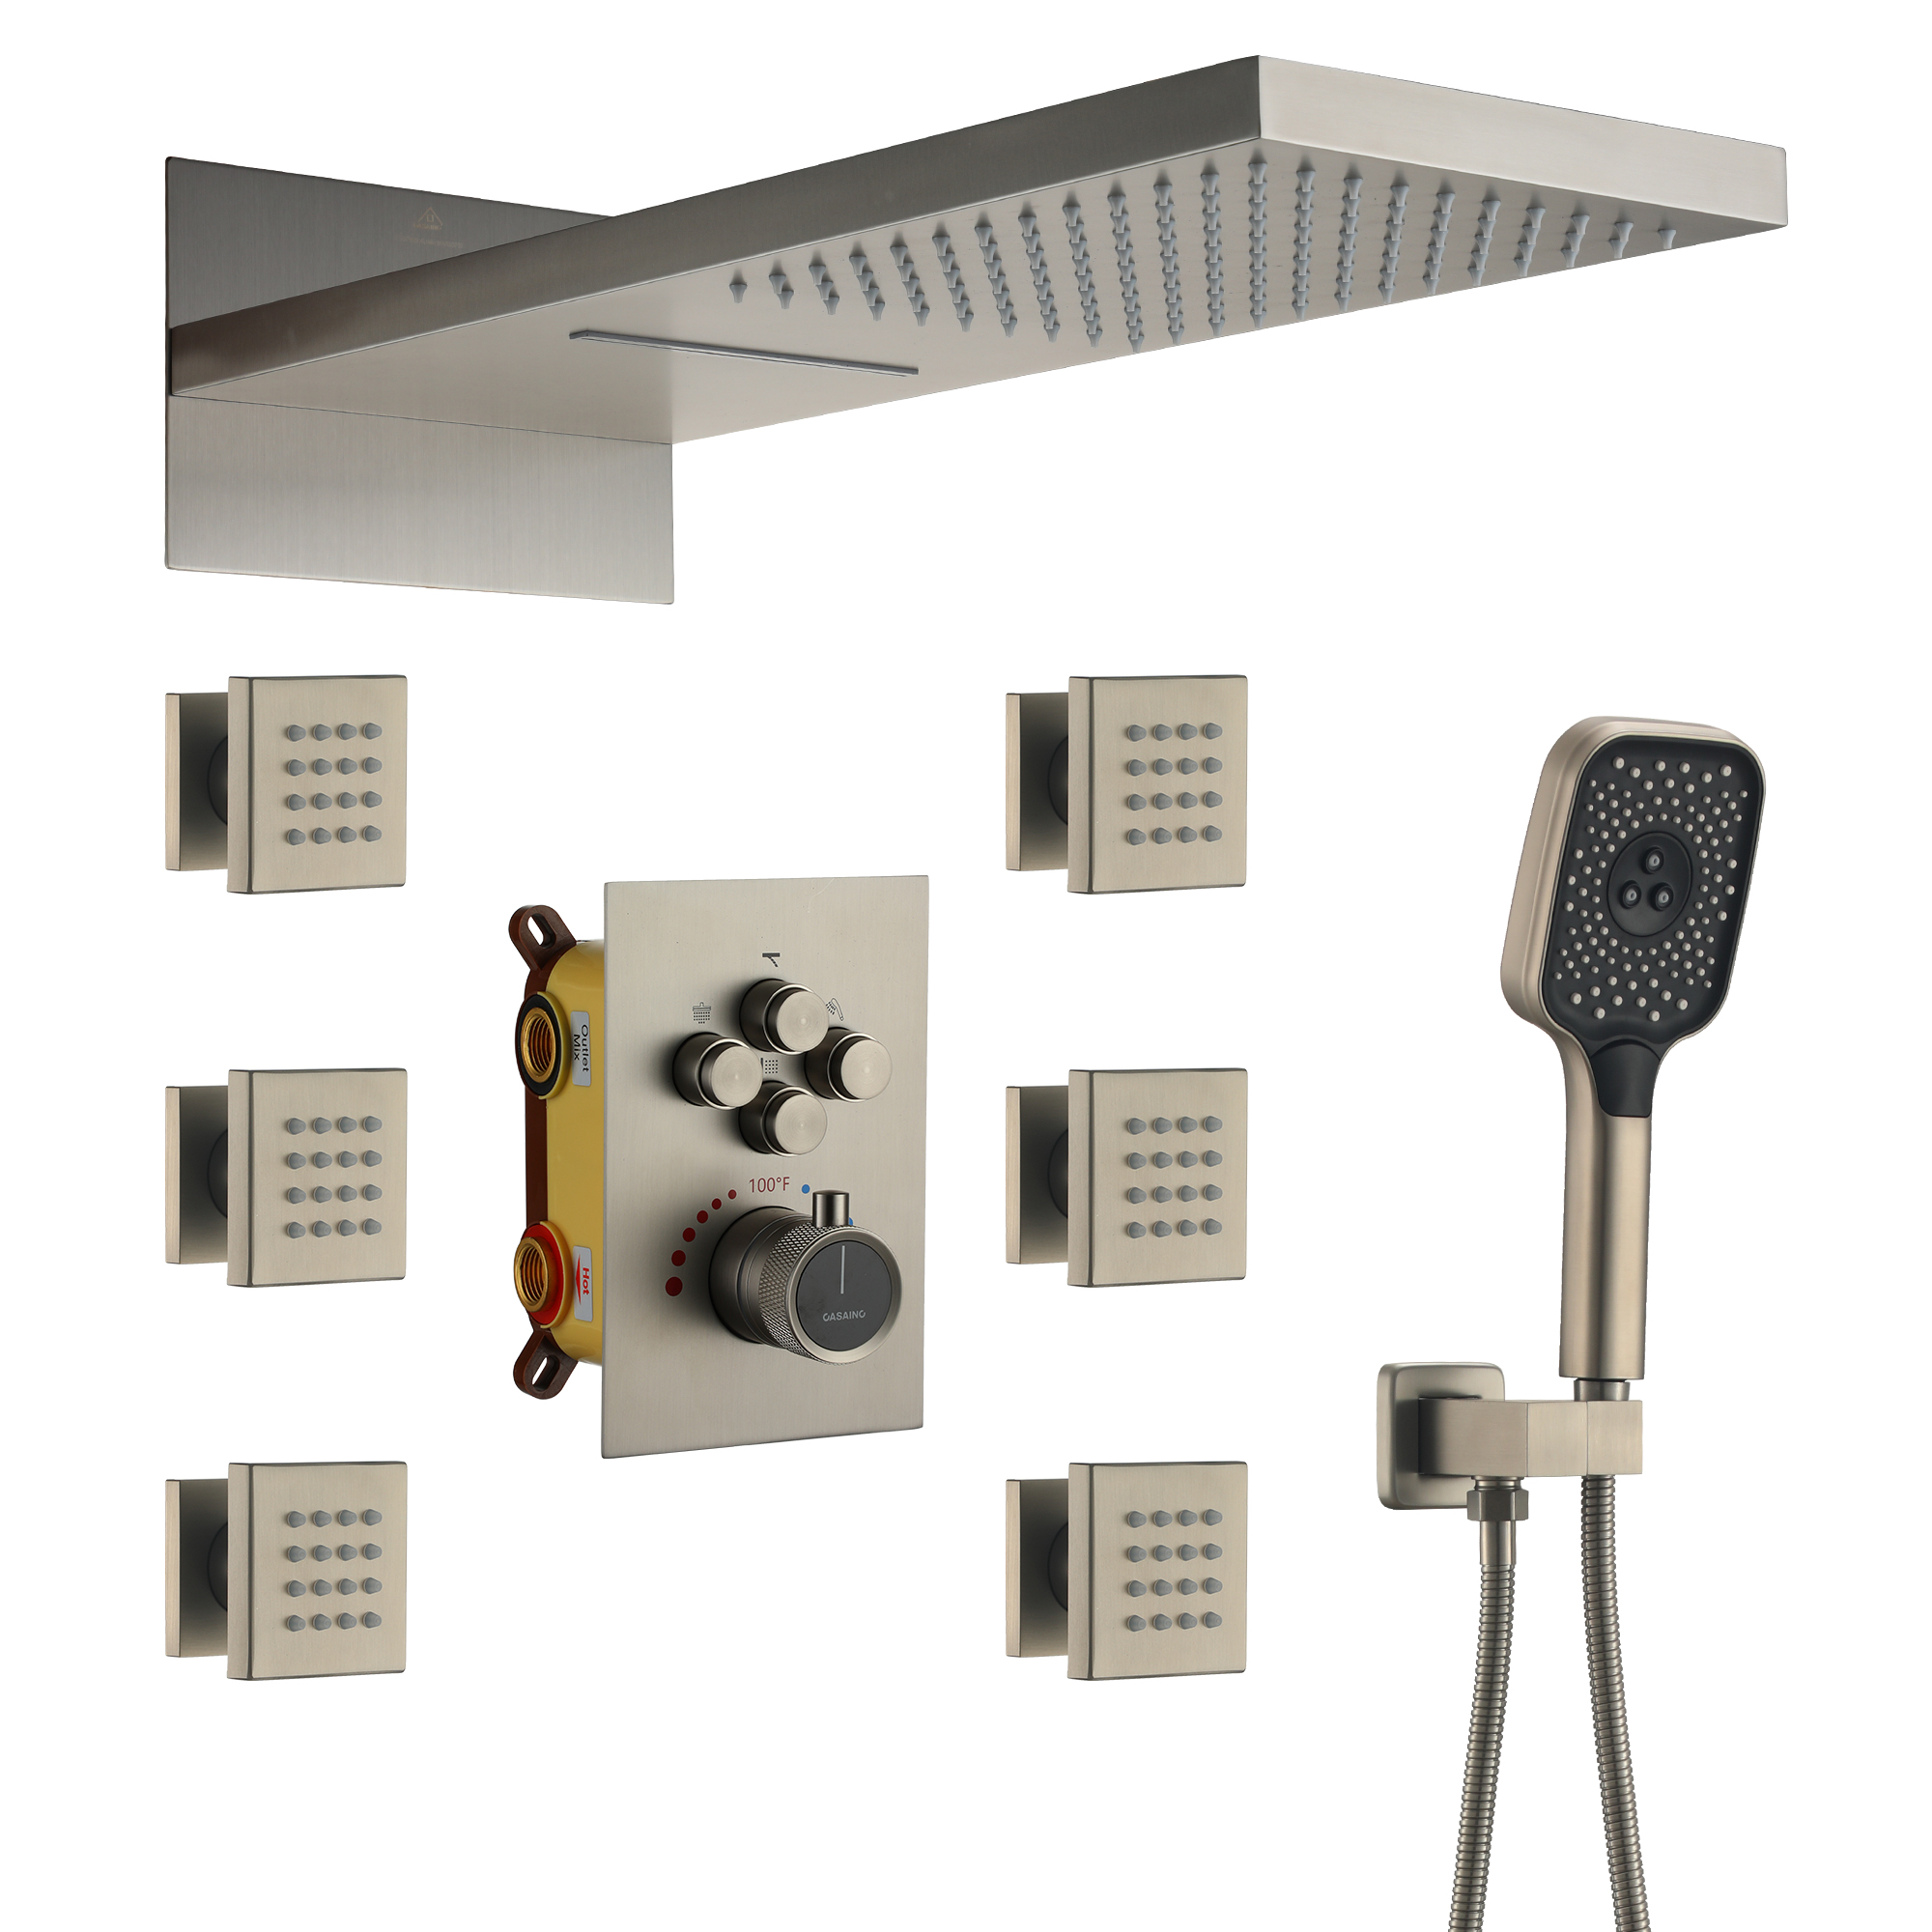 22 Wall Mounted Thermostatic Rain Shower Head System With 6 Body Jets